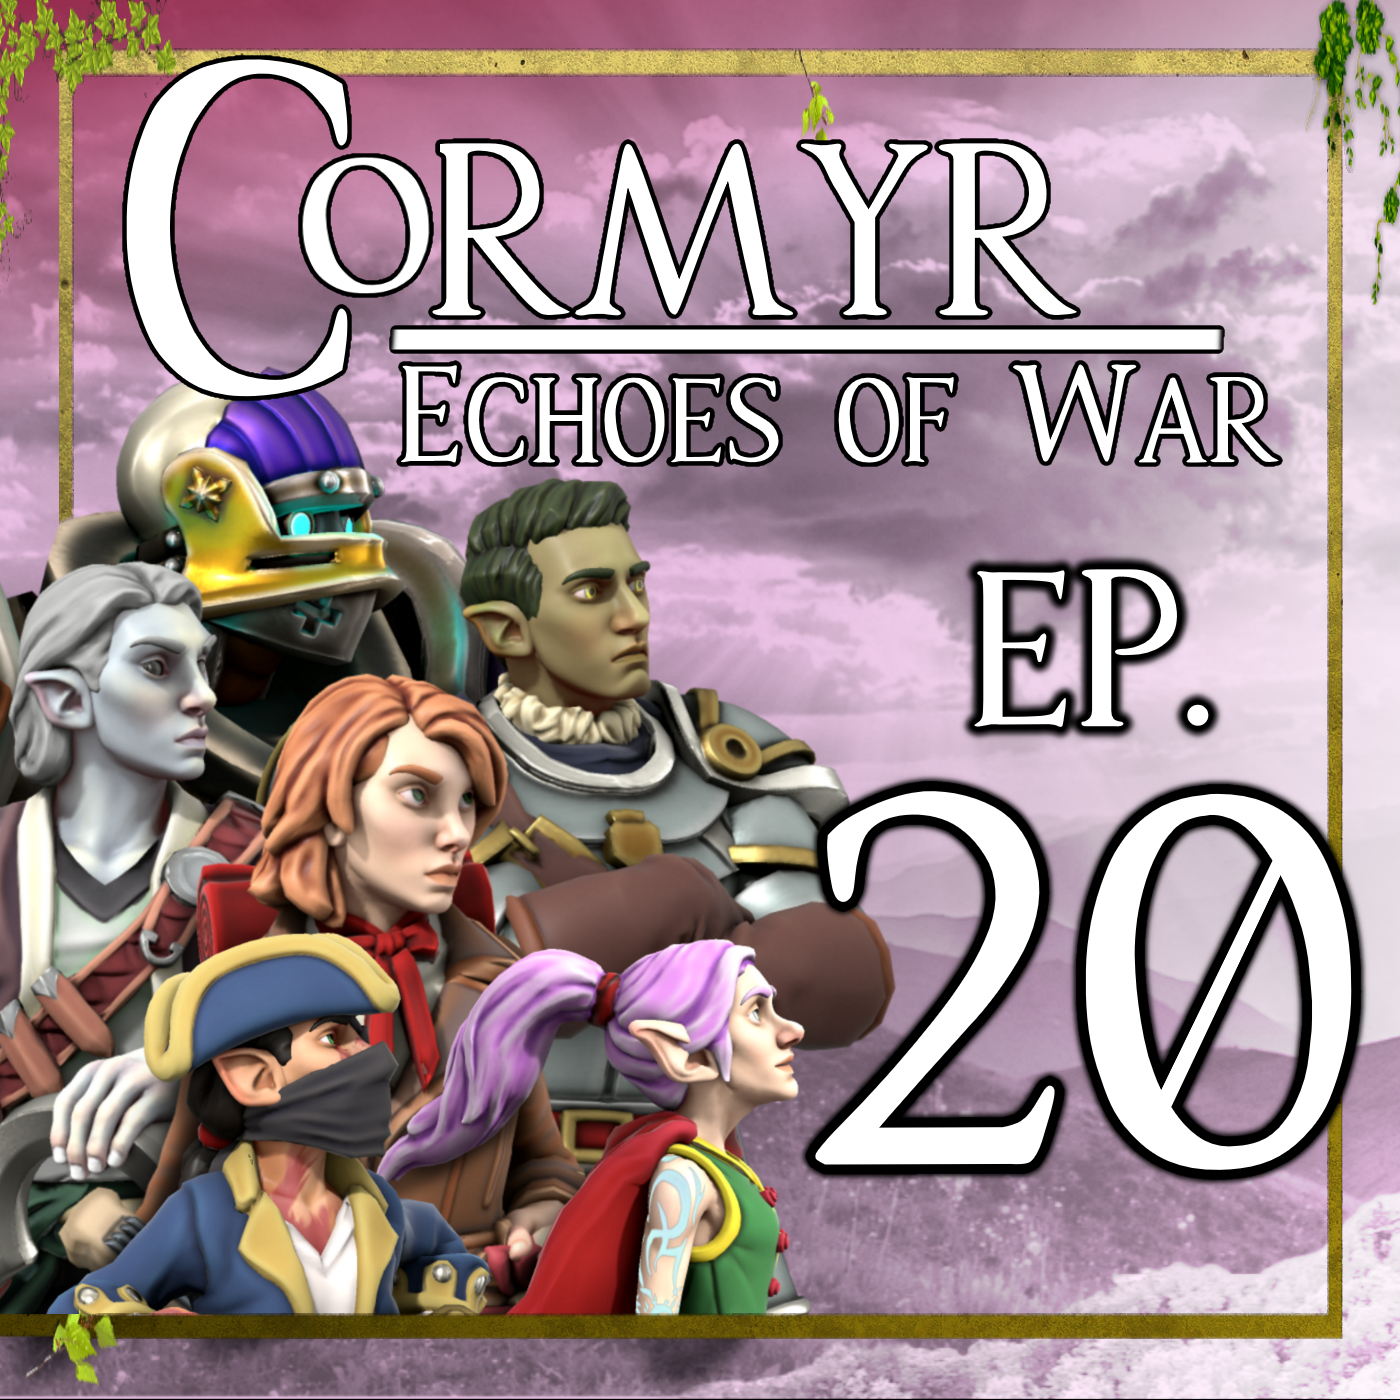 Cormyr: Echoes of War - Ep. 20 - A Path Less Travelled